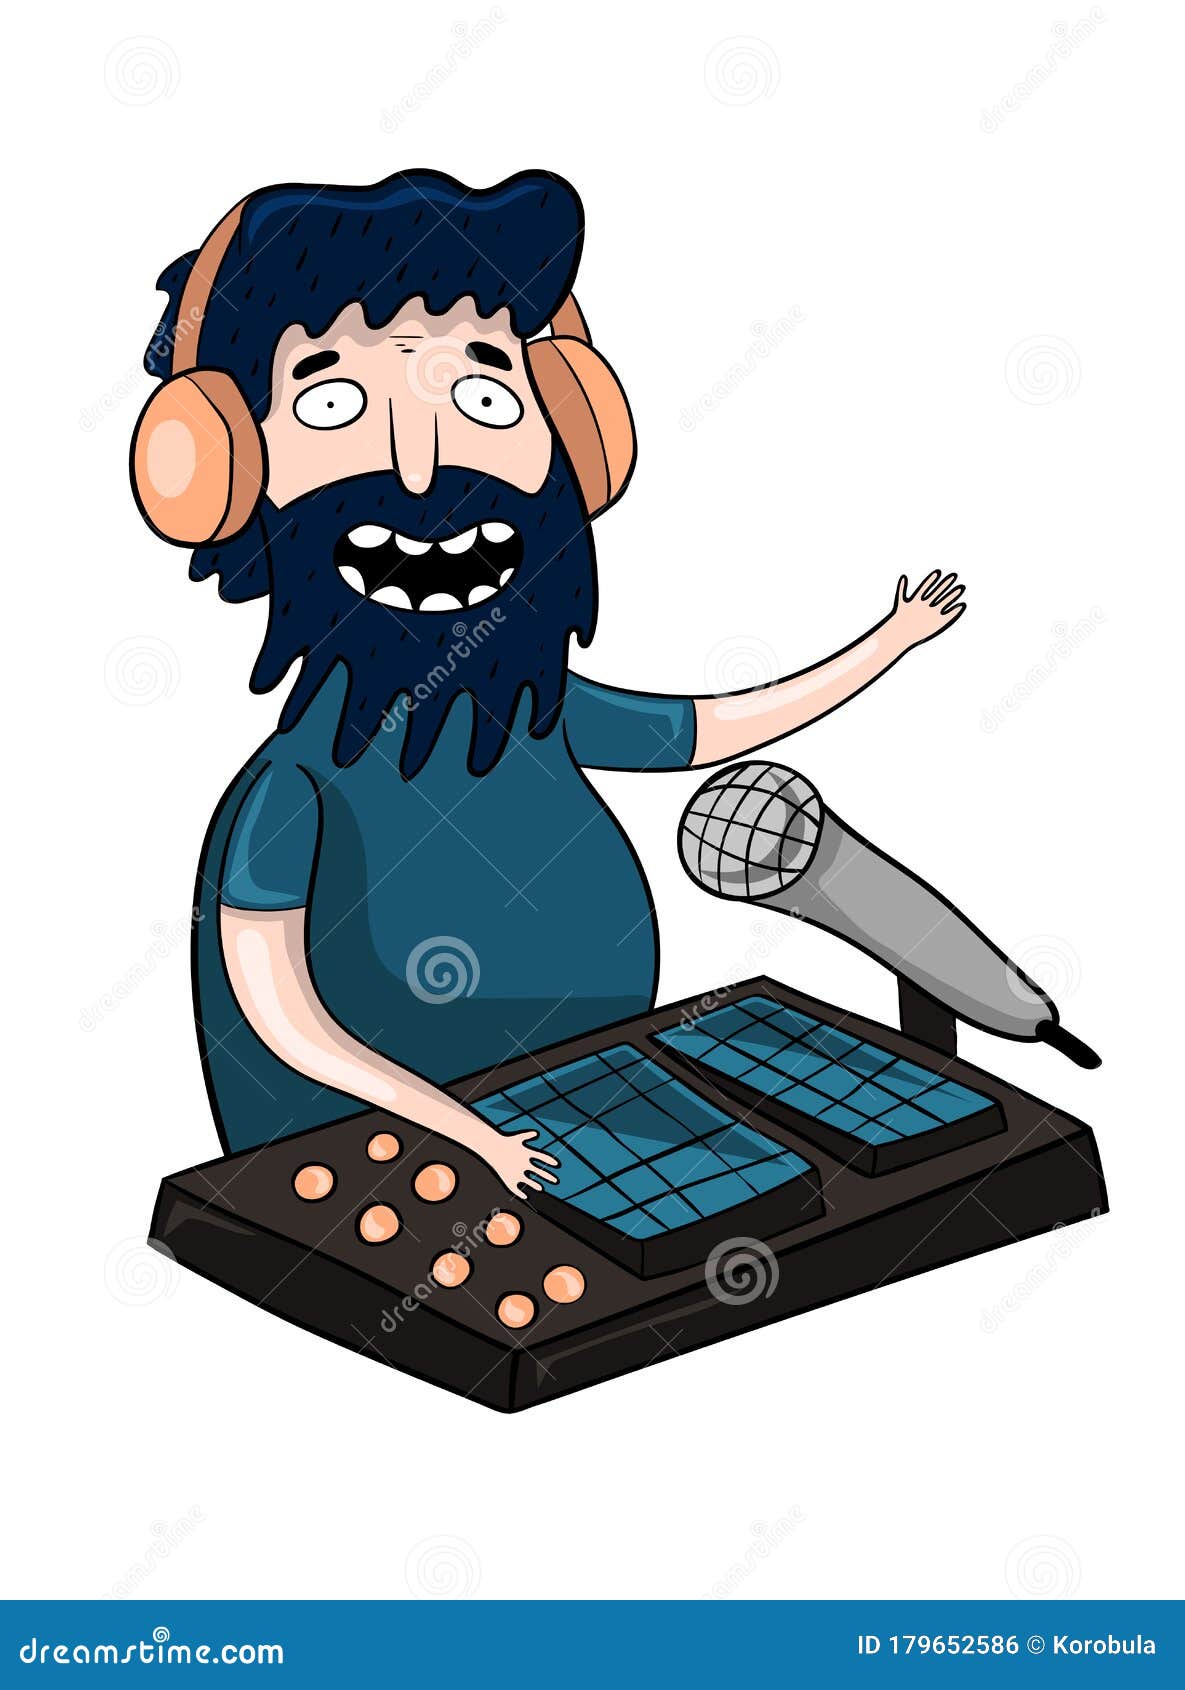 Cartoon Radio Dj Stock Illustrations 441 Cartoon Radio Dj Stock Illustrations Vectors Clipart Dreamstime Preferred radio stations and music genres, user's favorites, stations reviews and many other services need your personal data processing. dreamstime com